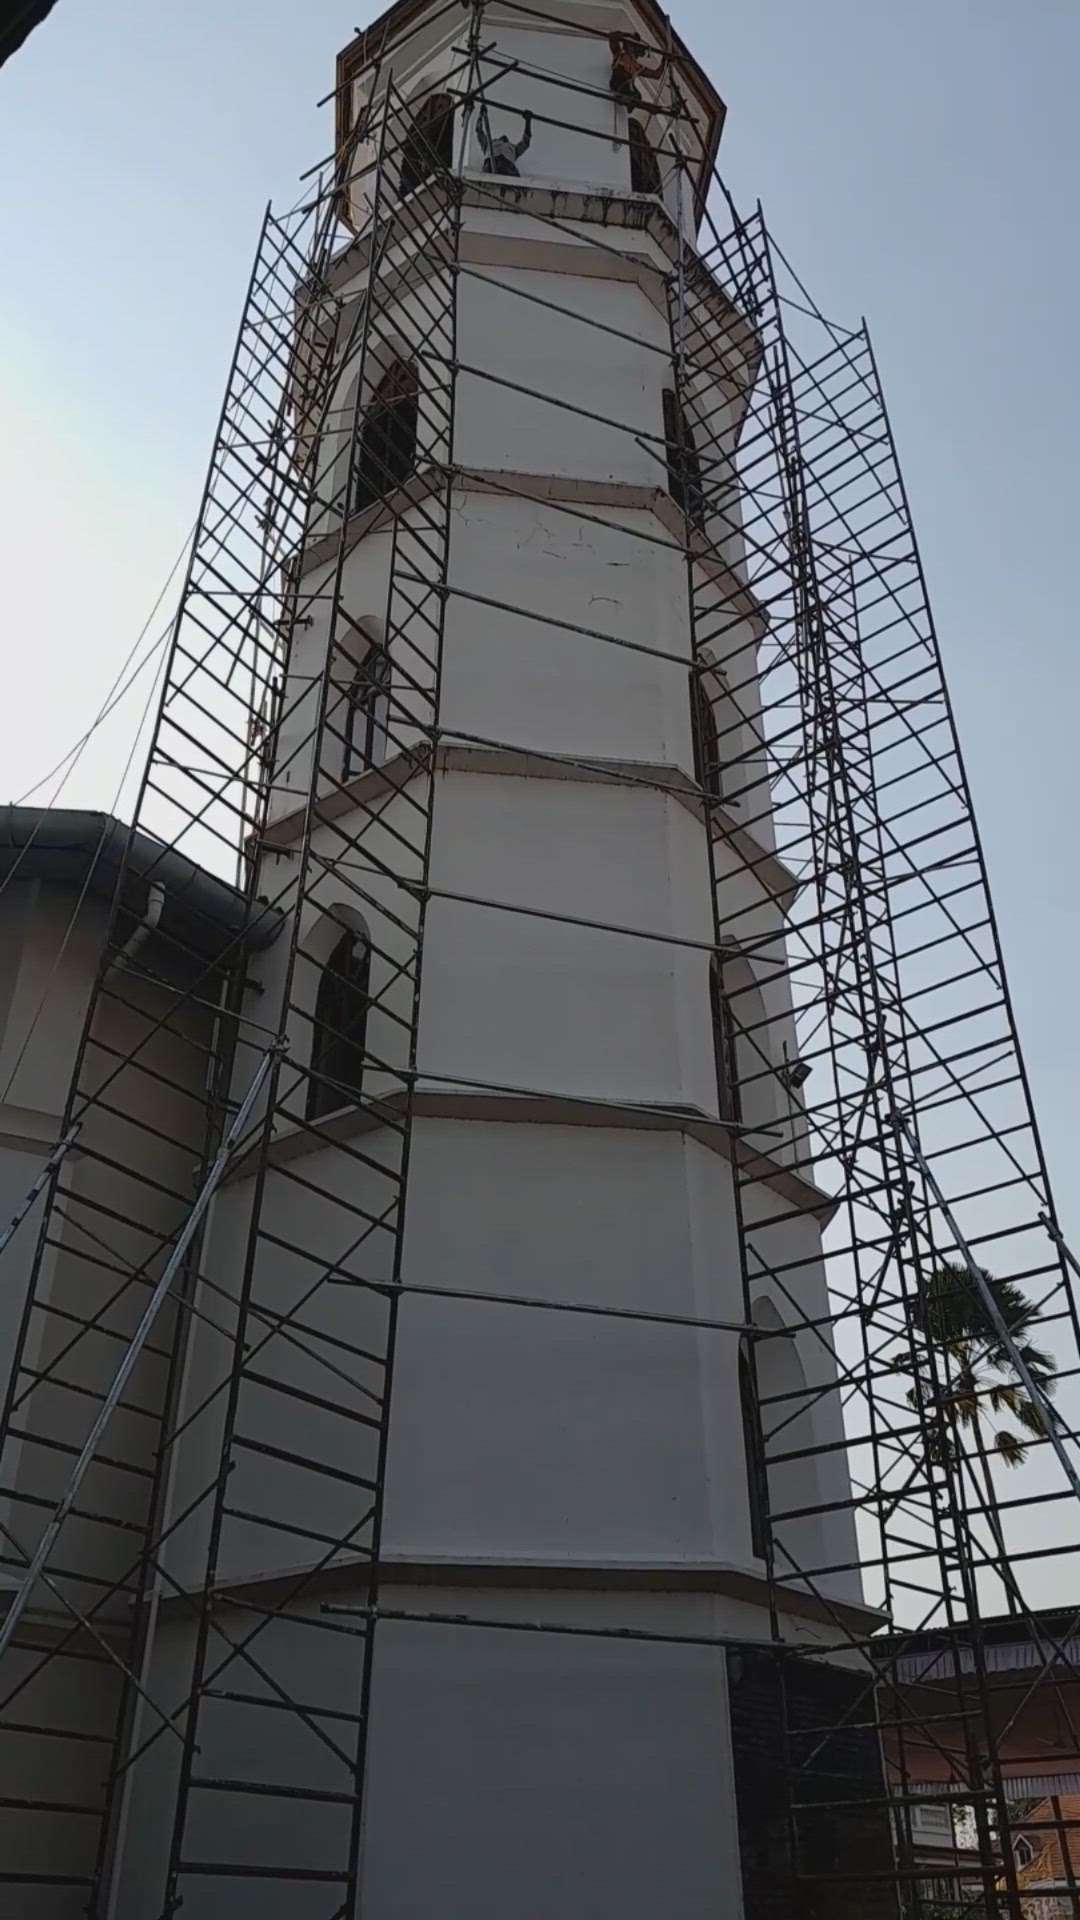 Our scaffolding for painting at St. Mary's' Metropolitan Church, Changanachery